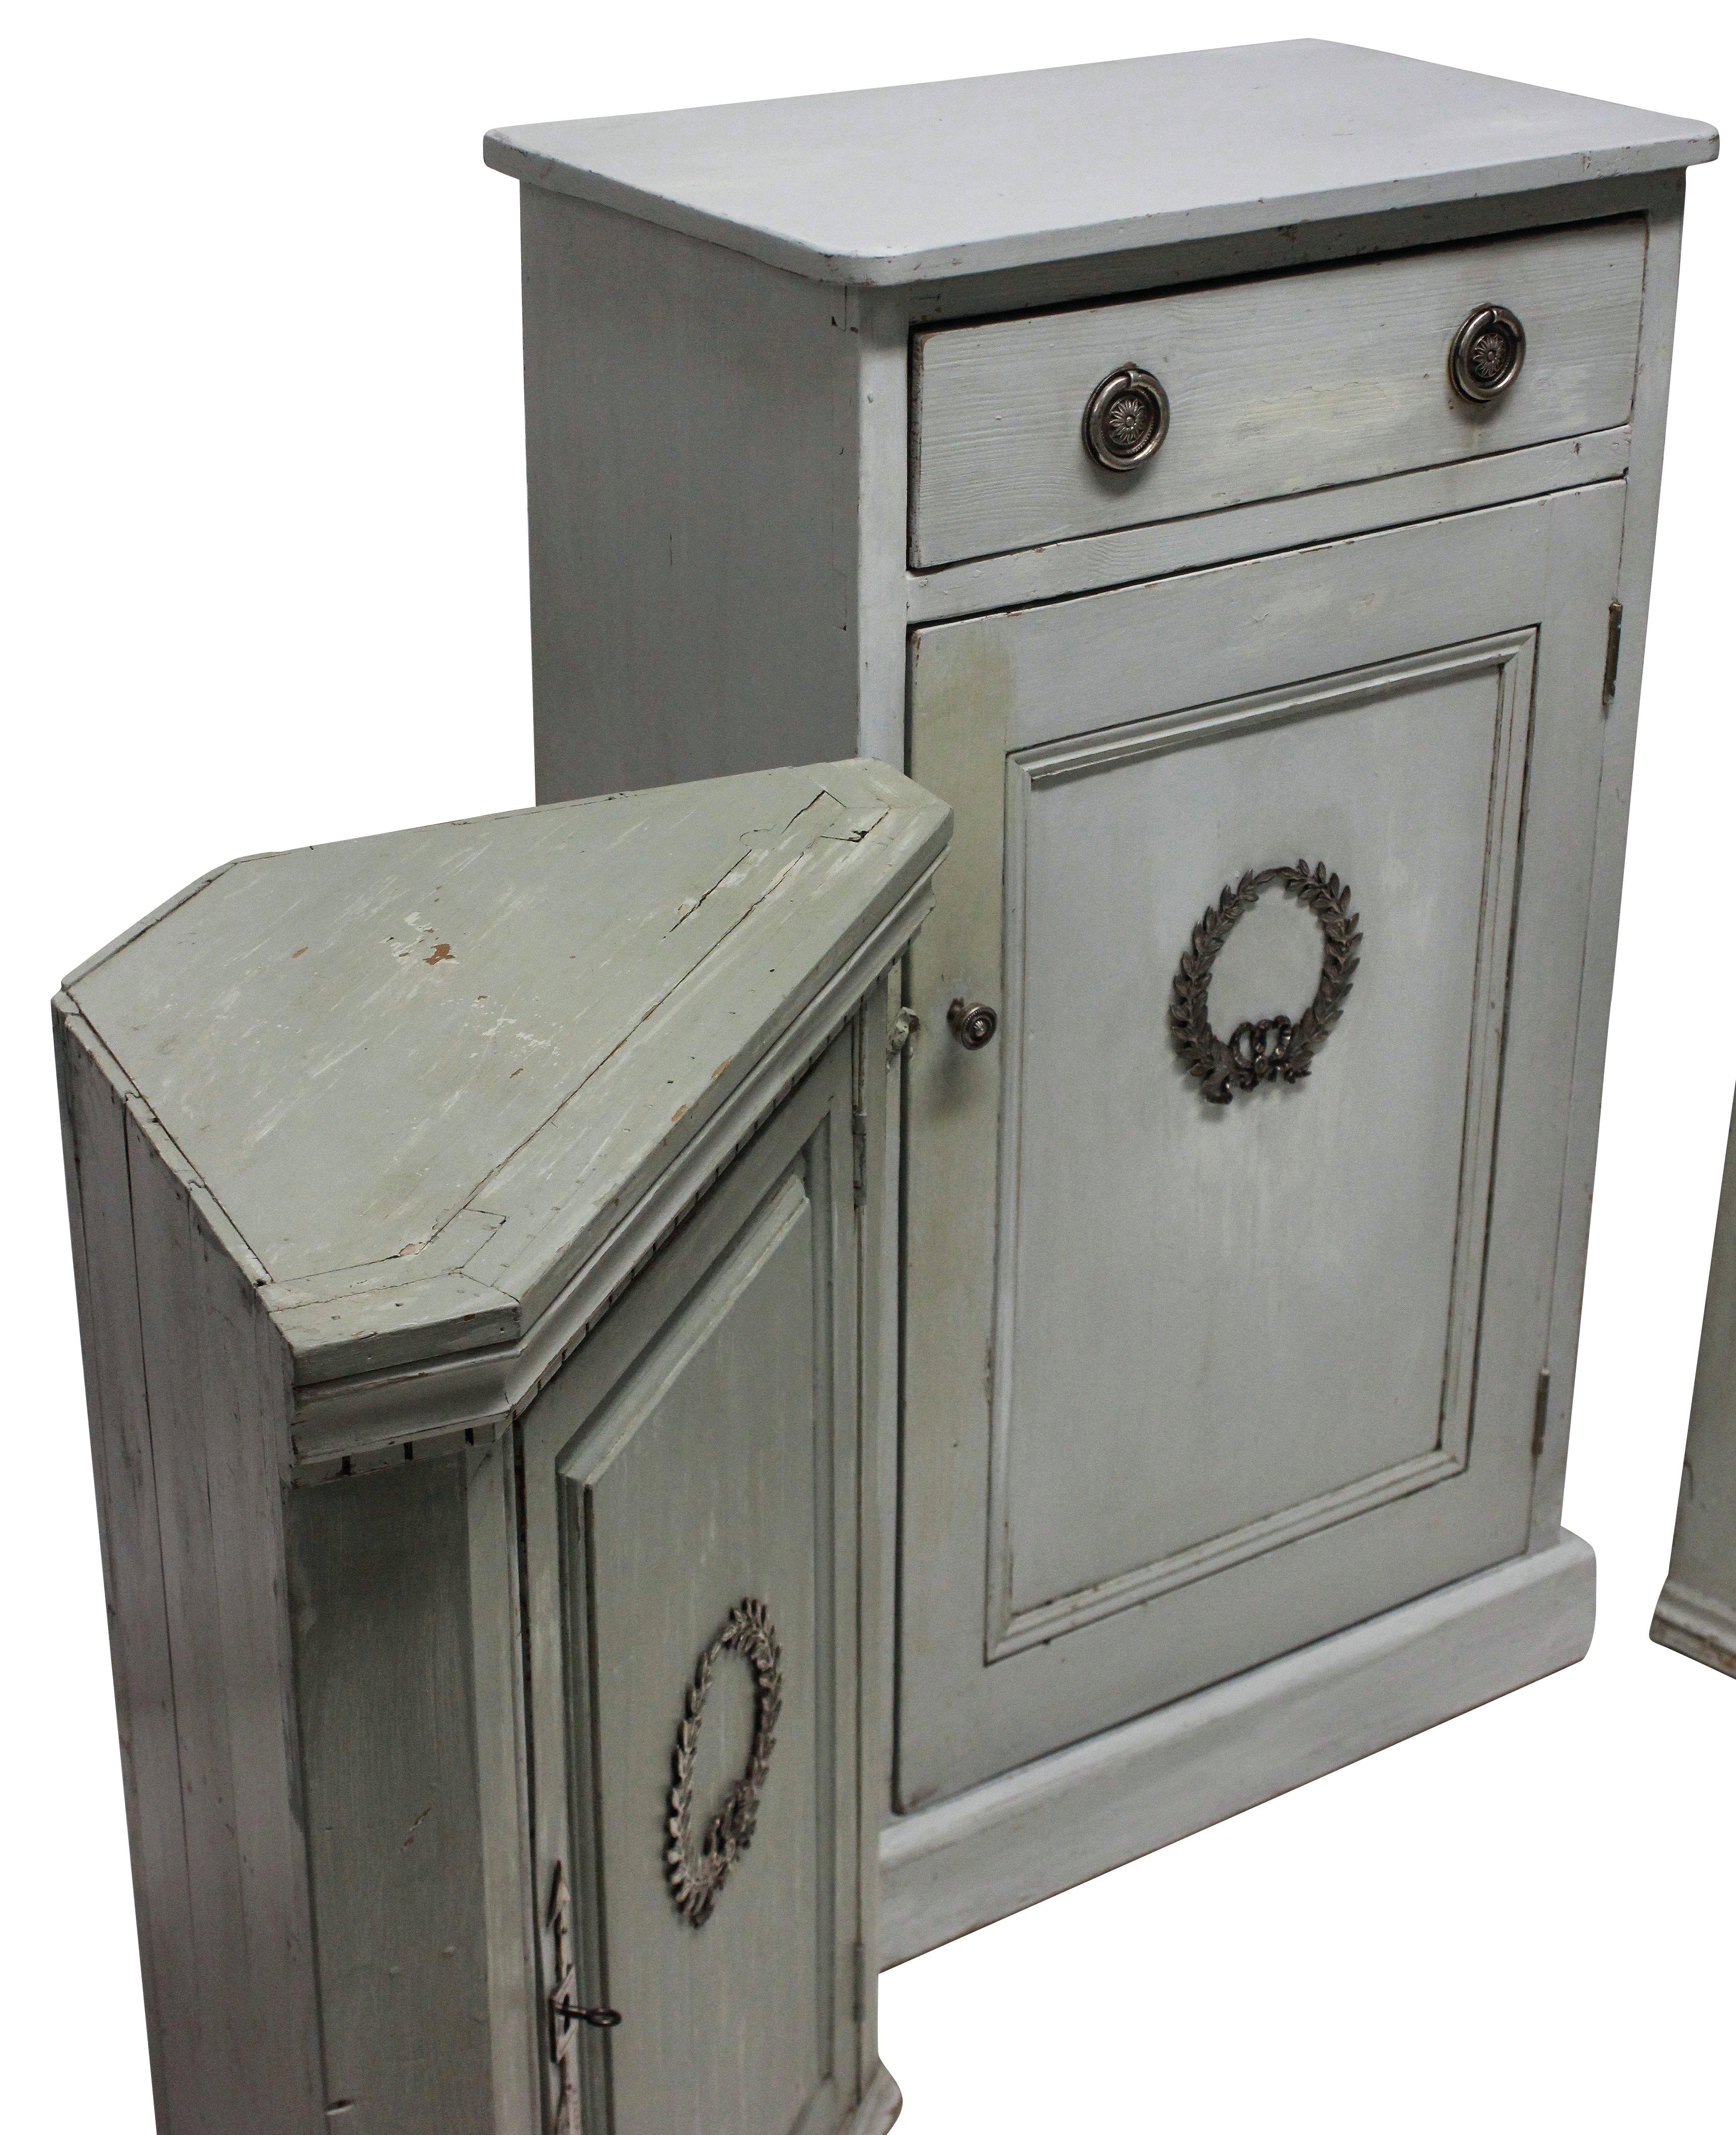 A set of three painted Swedish cupboards, comprising a larger cupboard with drawer and two floor standing corner cupboards, each with a shelf. The exteriors decorated with silver plated bronze mounts.

Measures: Large cupboard 106 high x 38 deep x